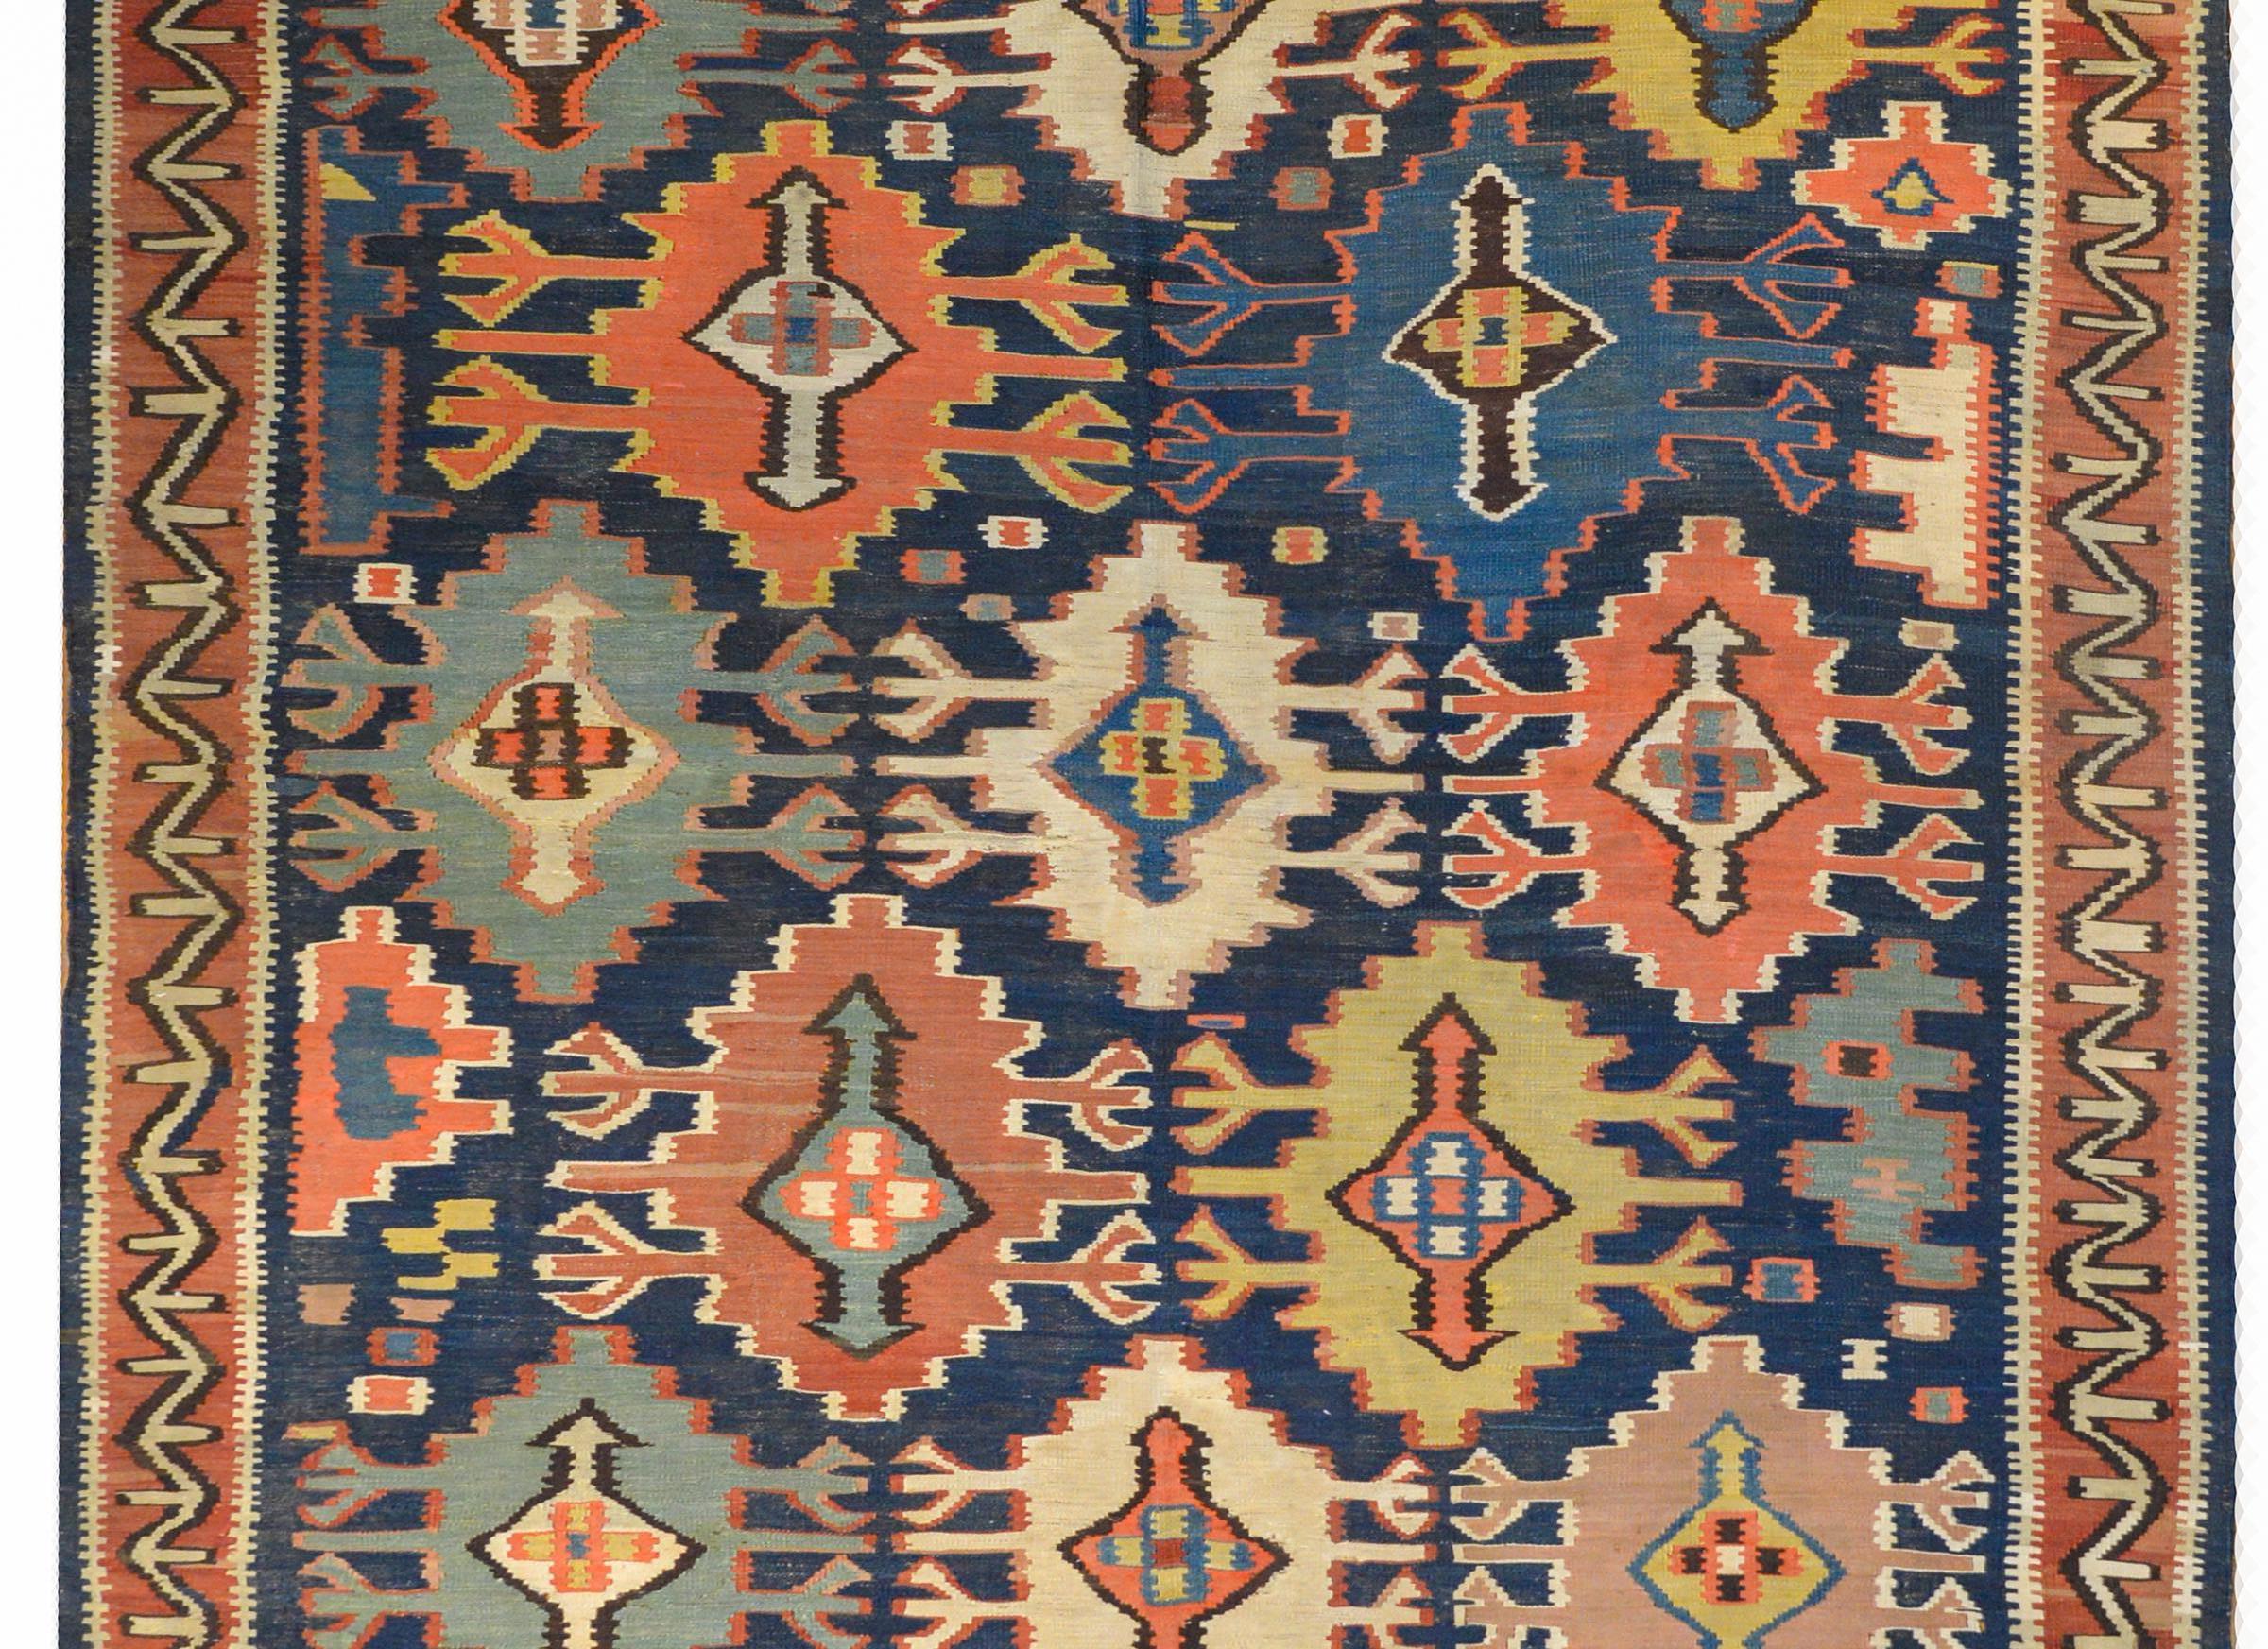 A gorgeous early 20th century Kuba Kilim rug with large boldly patterned stylized floral shapes rendered in myriad colors on a brilliant indigo background. The border is simple with a geometric pattern woven in crimson, black, and white vegetable